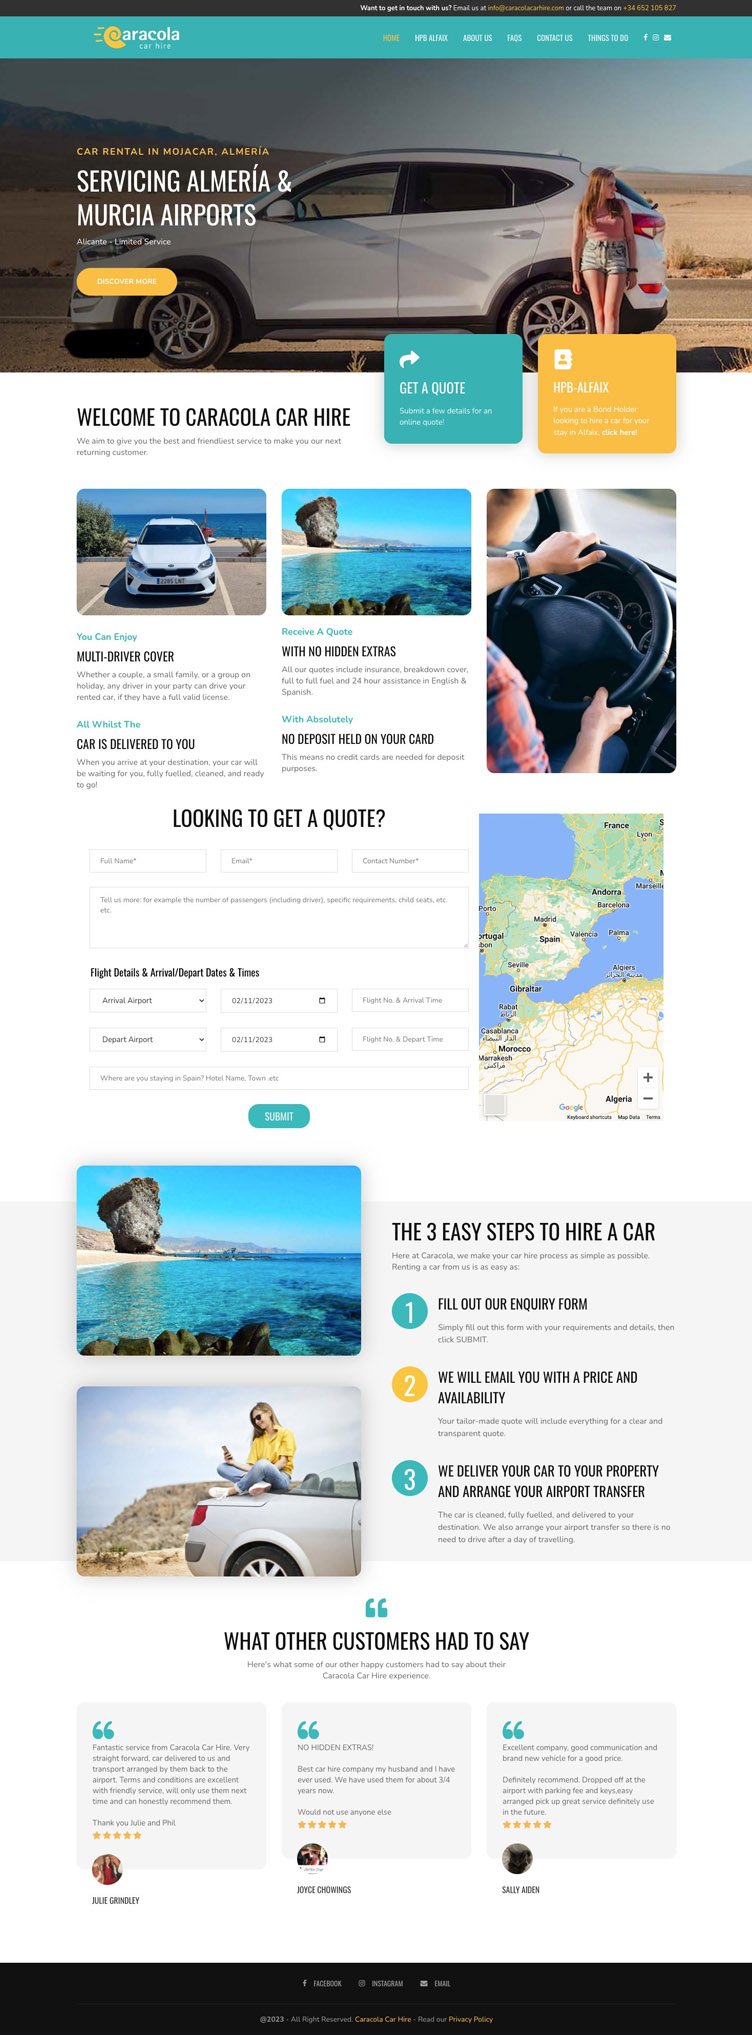 A mock-up of a web design for a car hire company in Spain